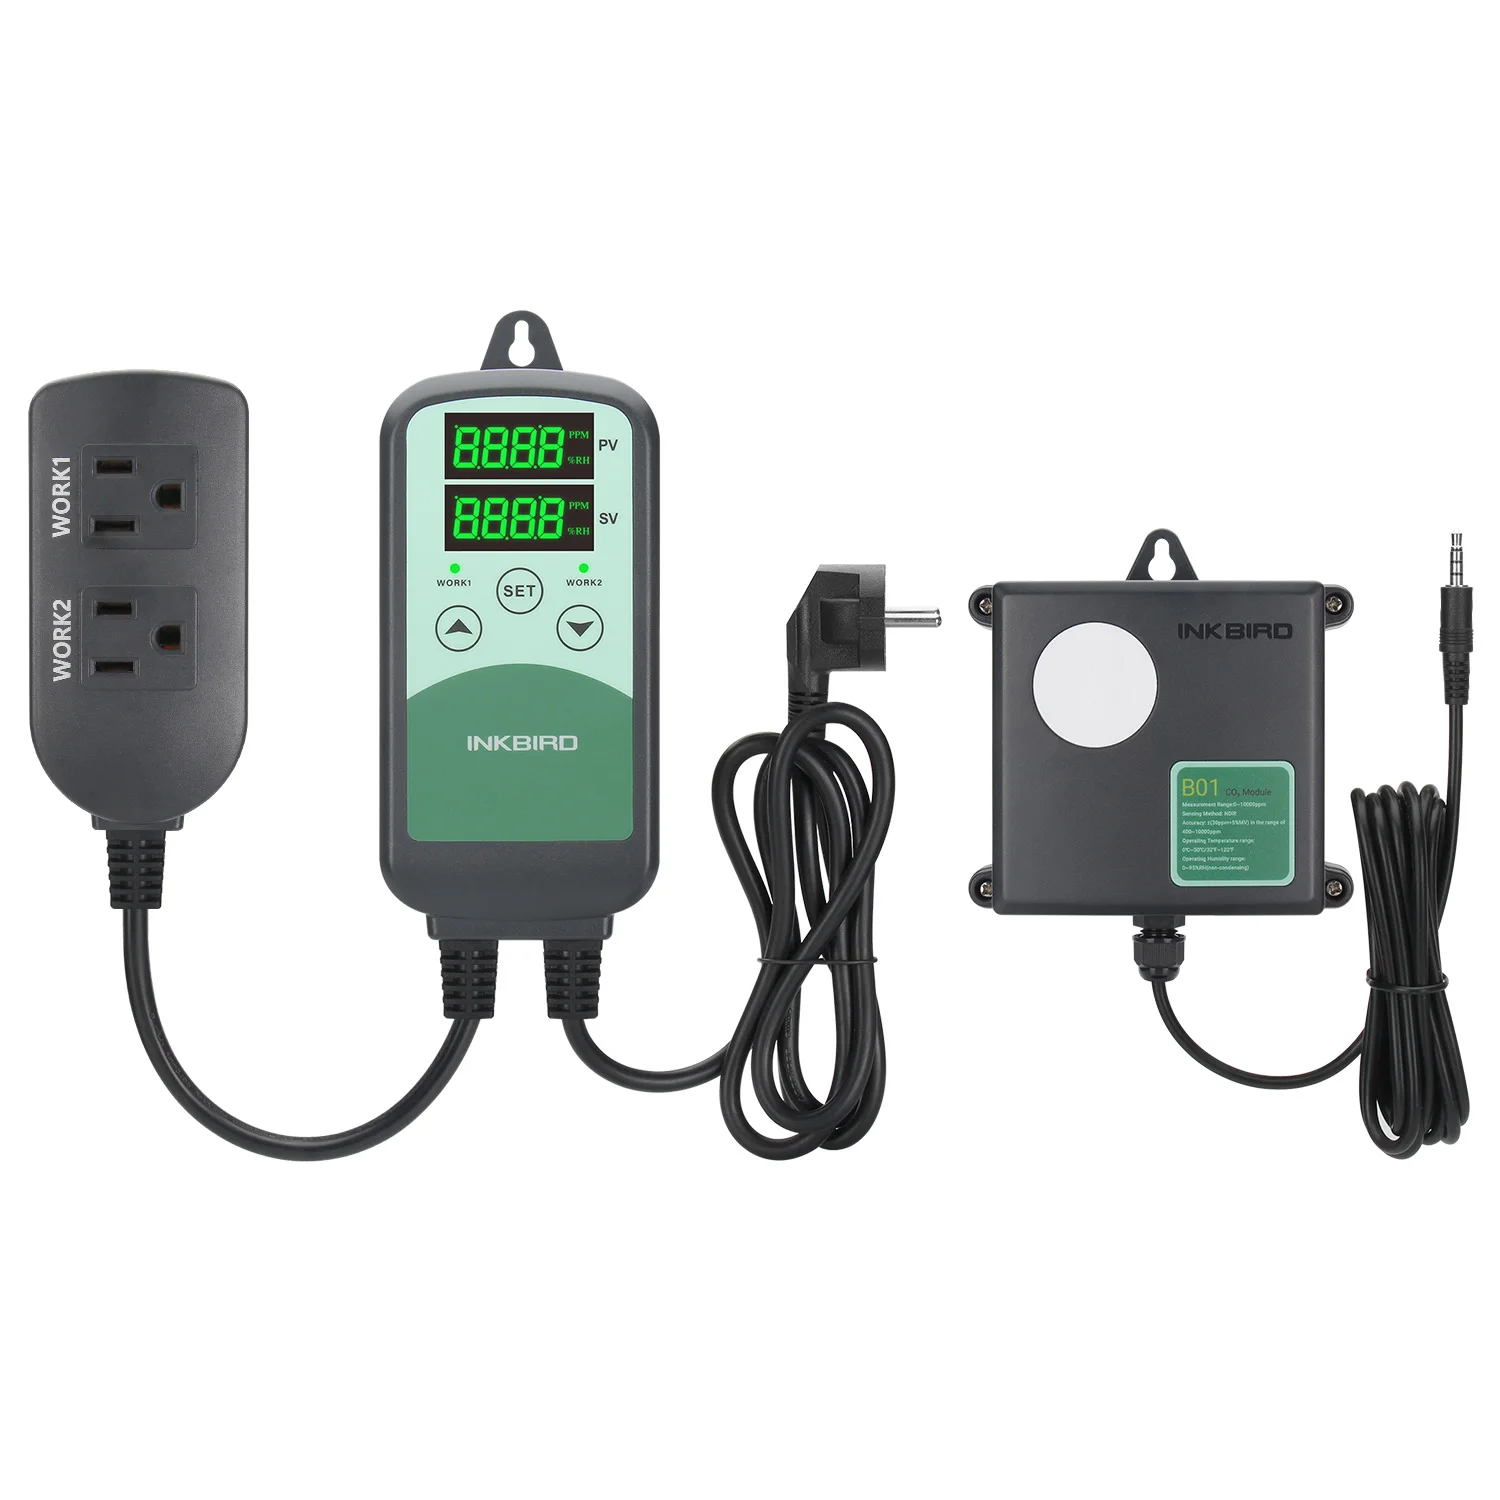 INKBIRD ICC-500T Digital CO2 Controller, Programmable CO2 Controller with different sensor